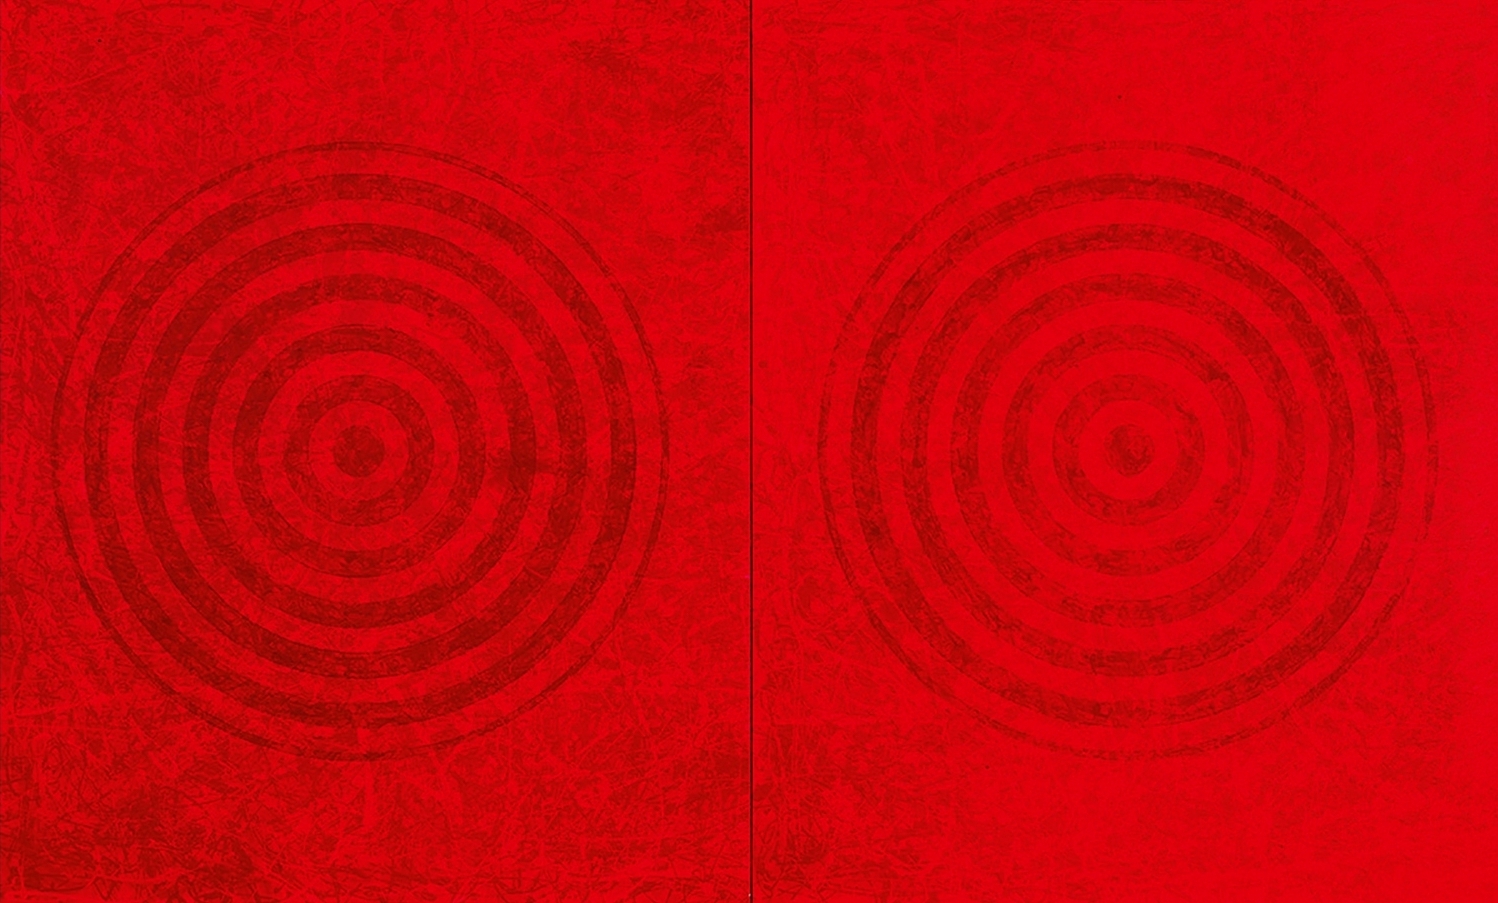 J. Steven Manolis, Redworld-Concentric, 2016, 72 x 120 inches, 72.120.01, Red Abstract Art, Large Abstract Wall Art for sale at Manolis Projects Art Gallery, Miami, Fl